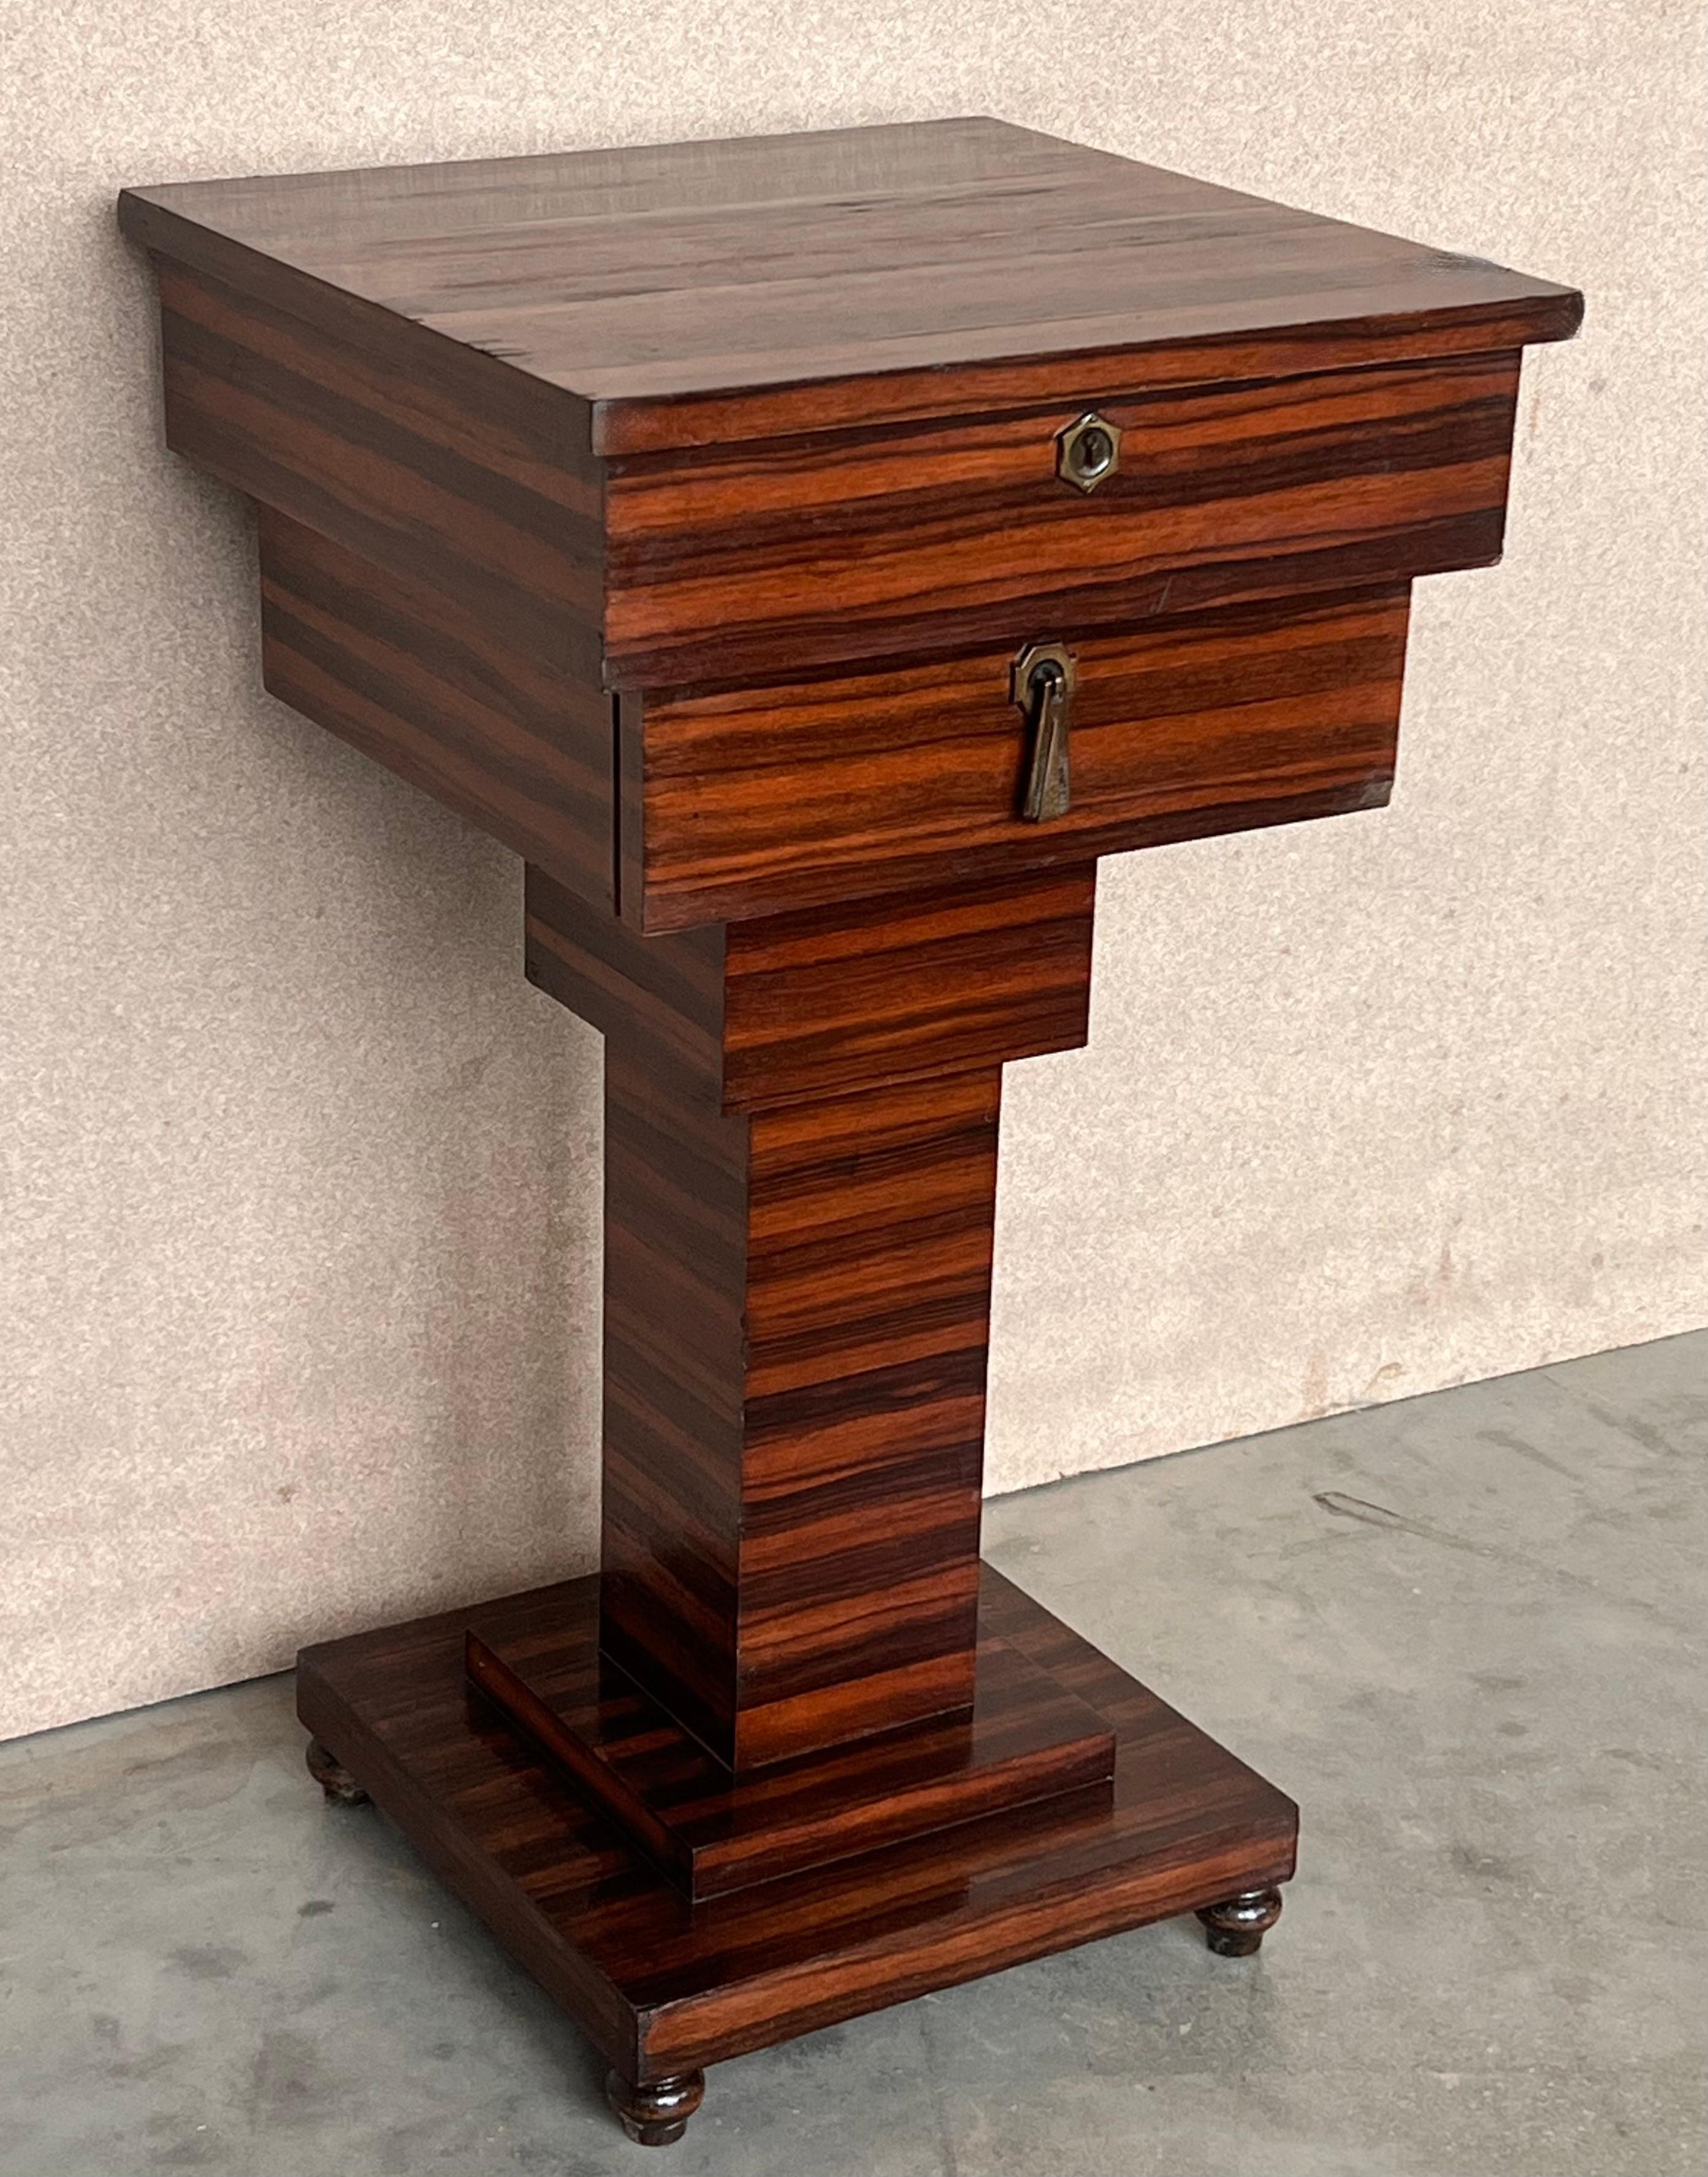 20th Century Mahogany Art Deco Sewing or Jelwery Box on Stand, circa 1860 For Sale